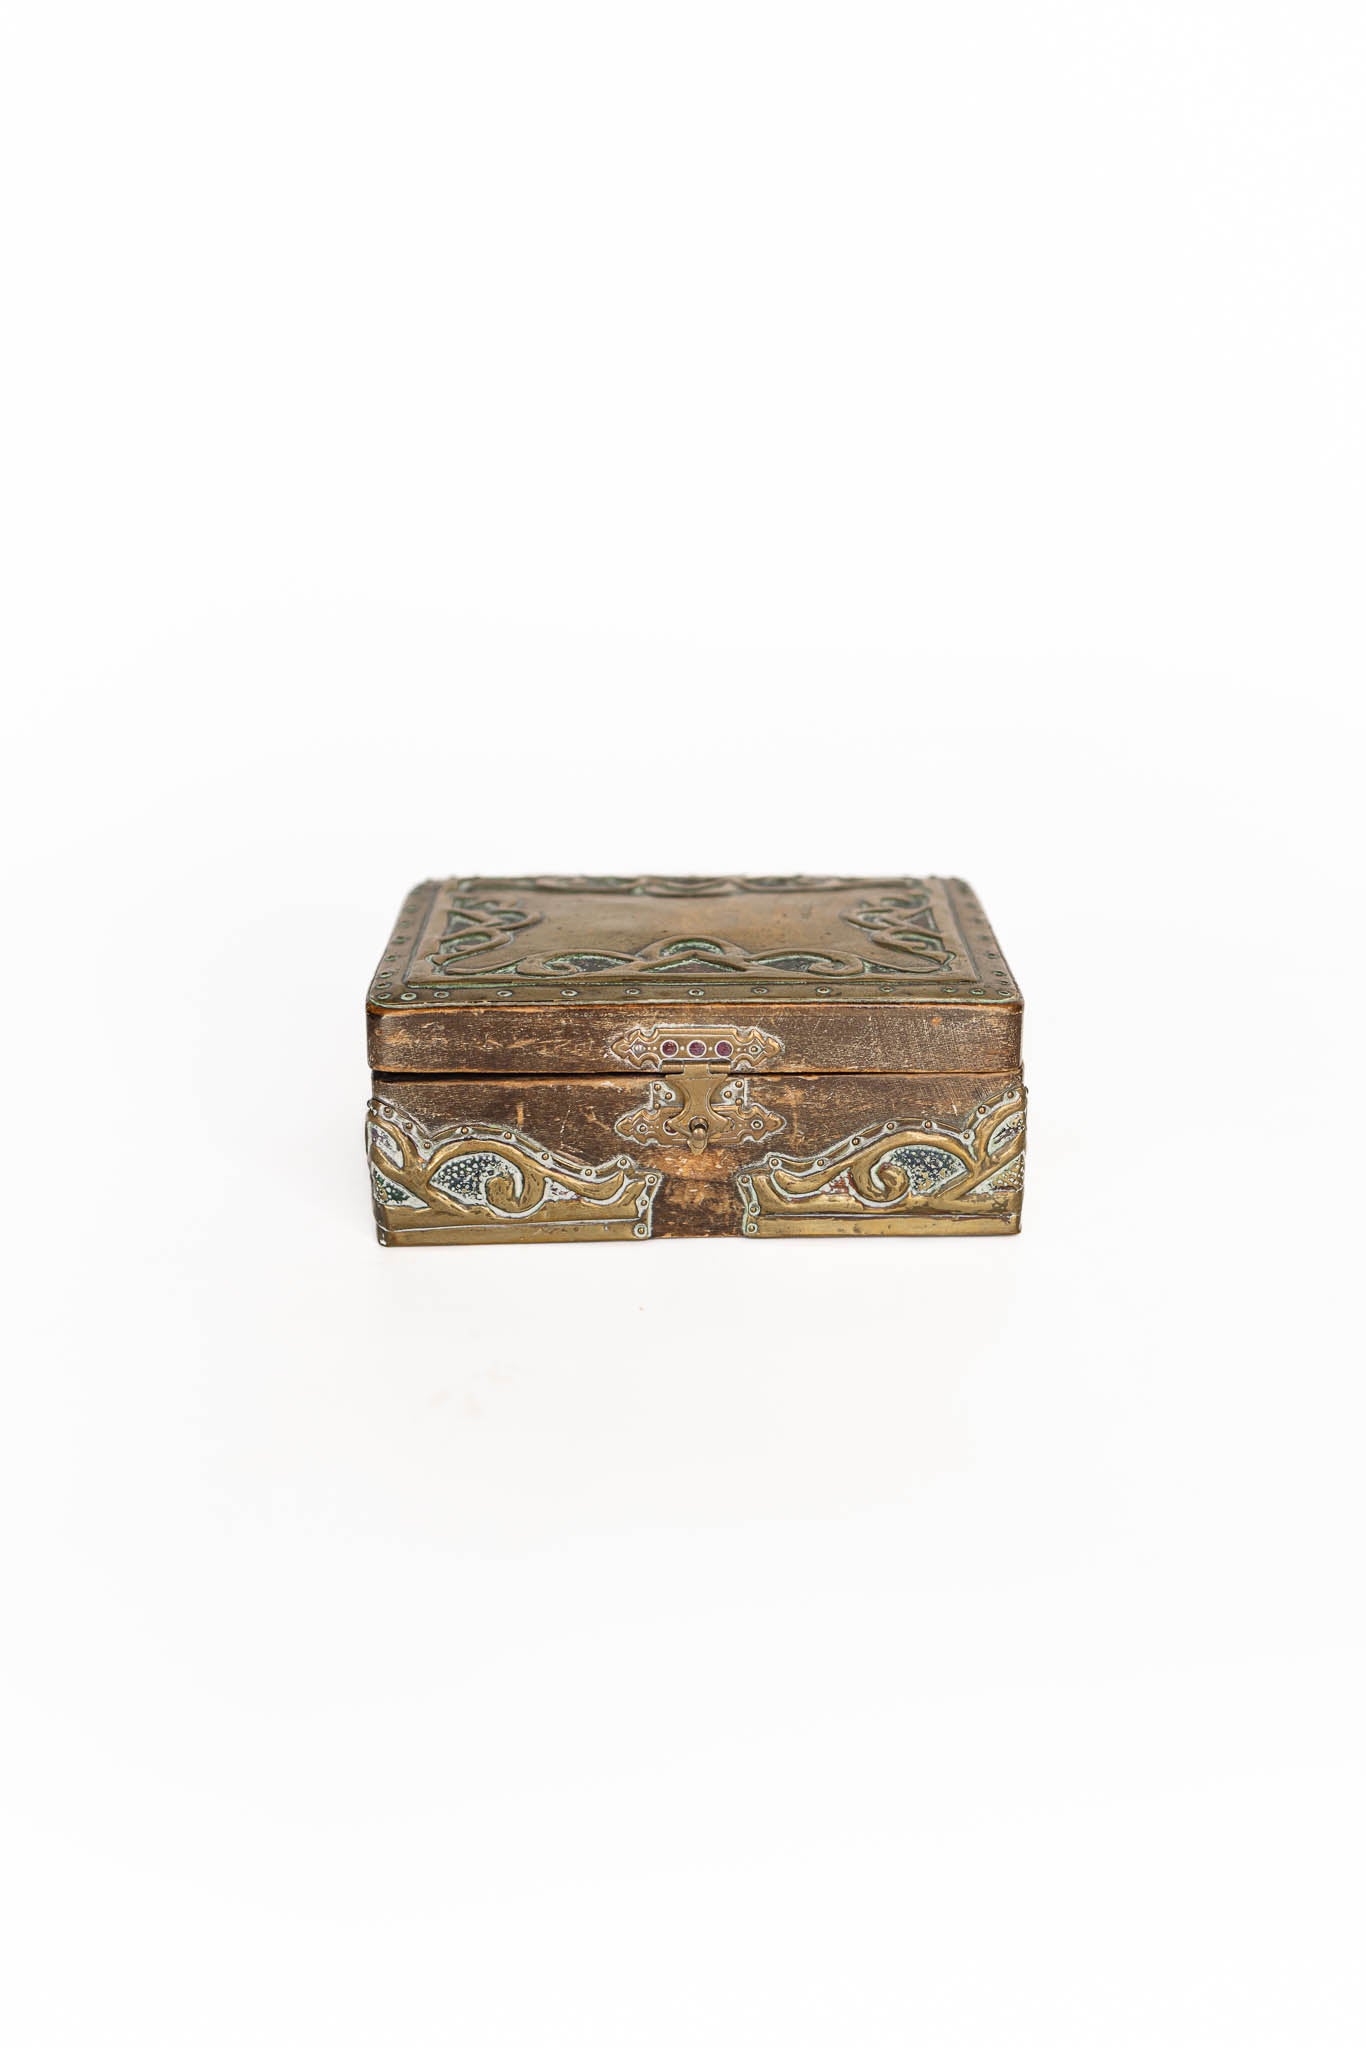 Small Wood and Brass Antique Card Box